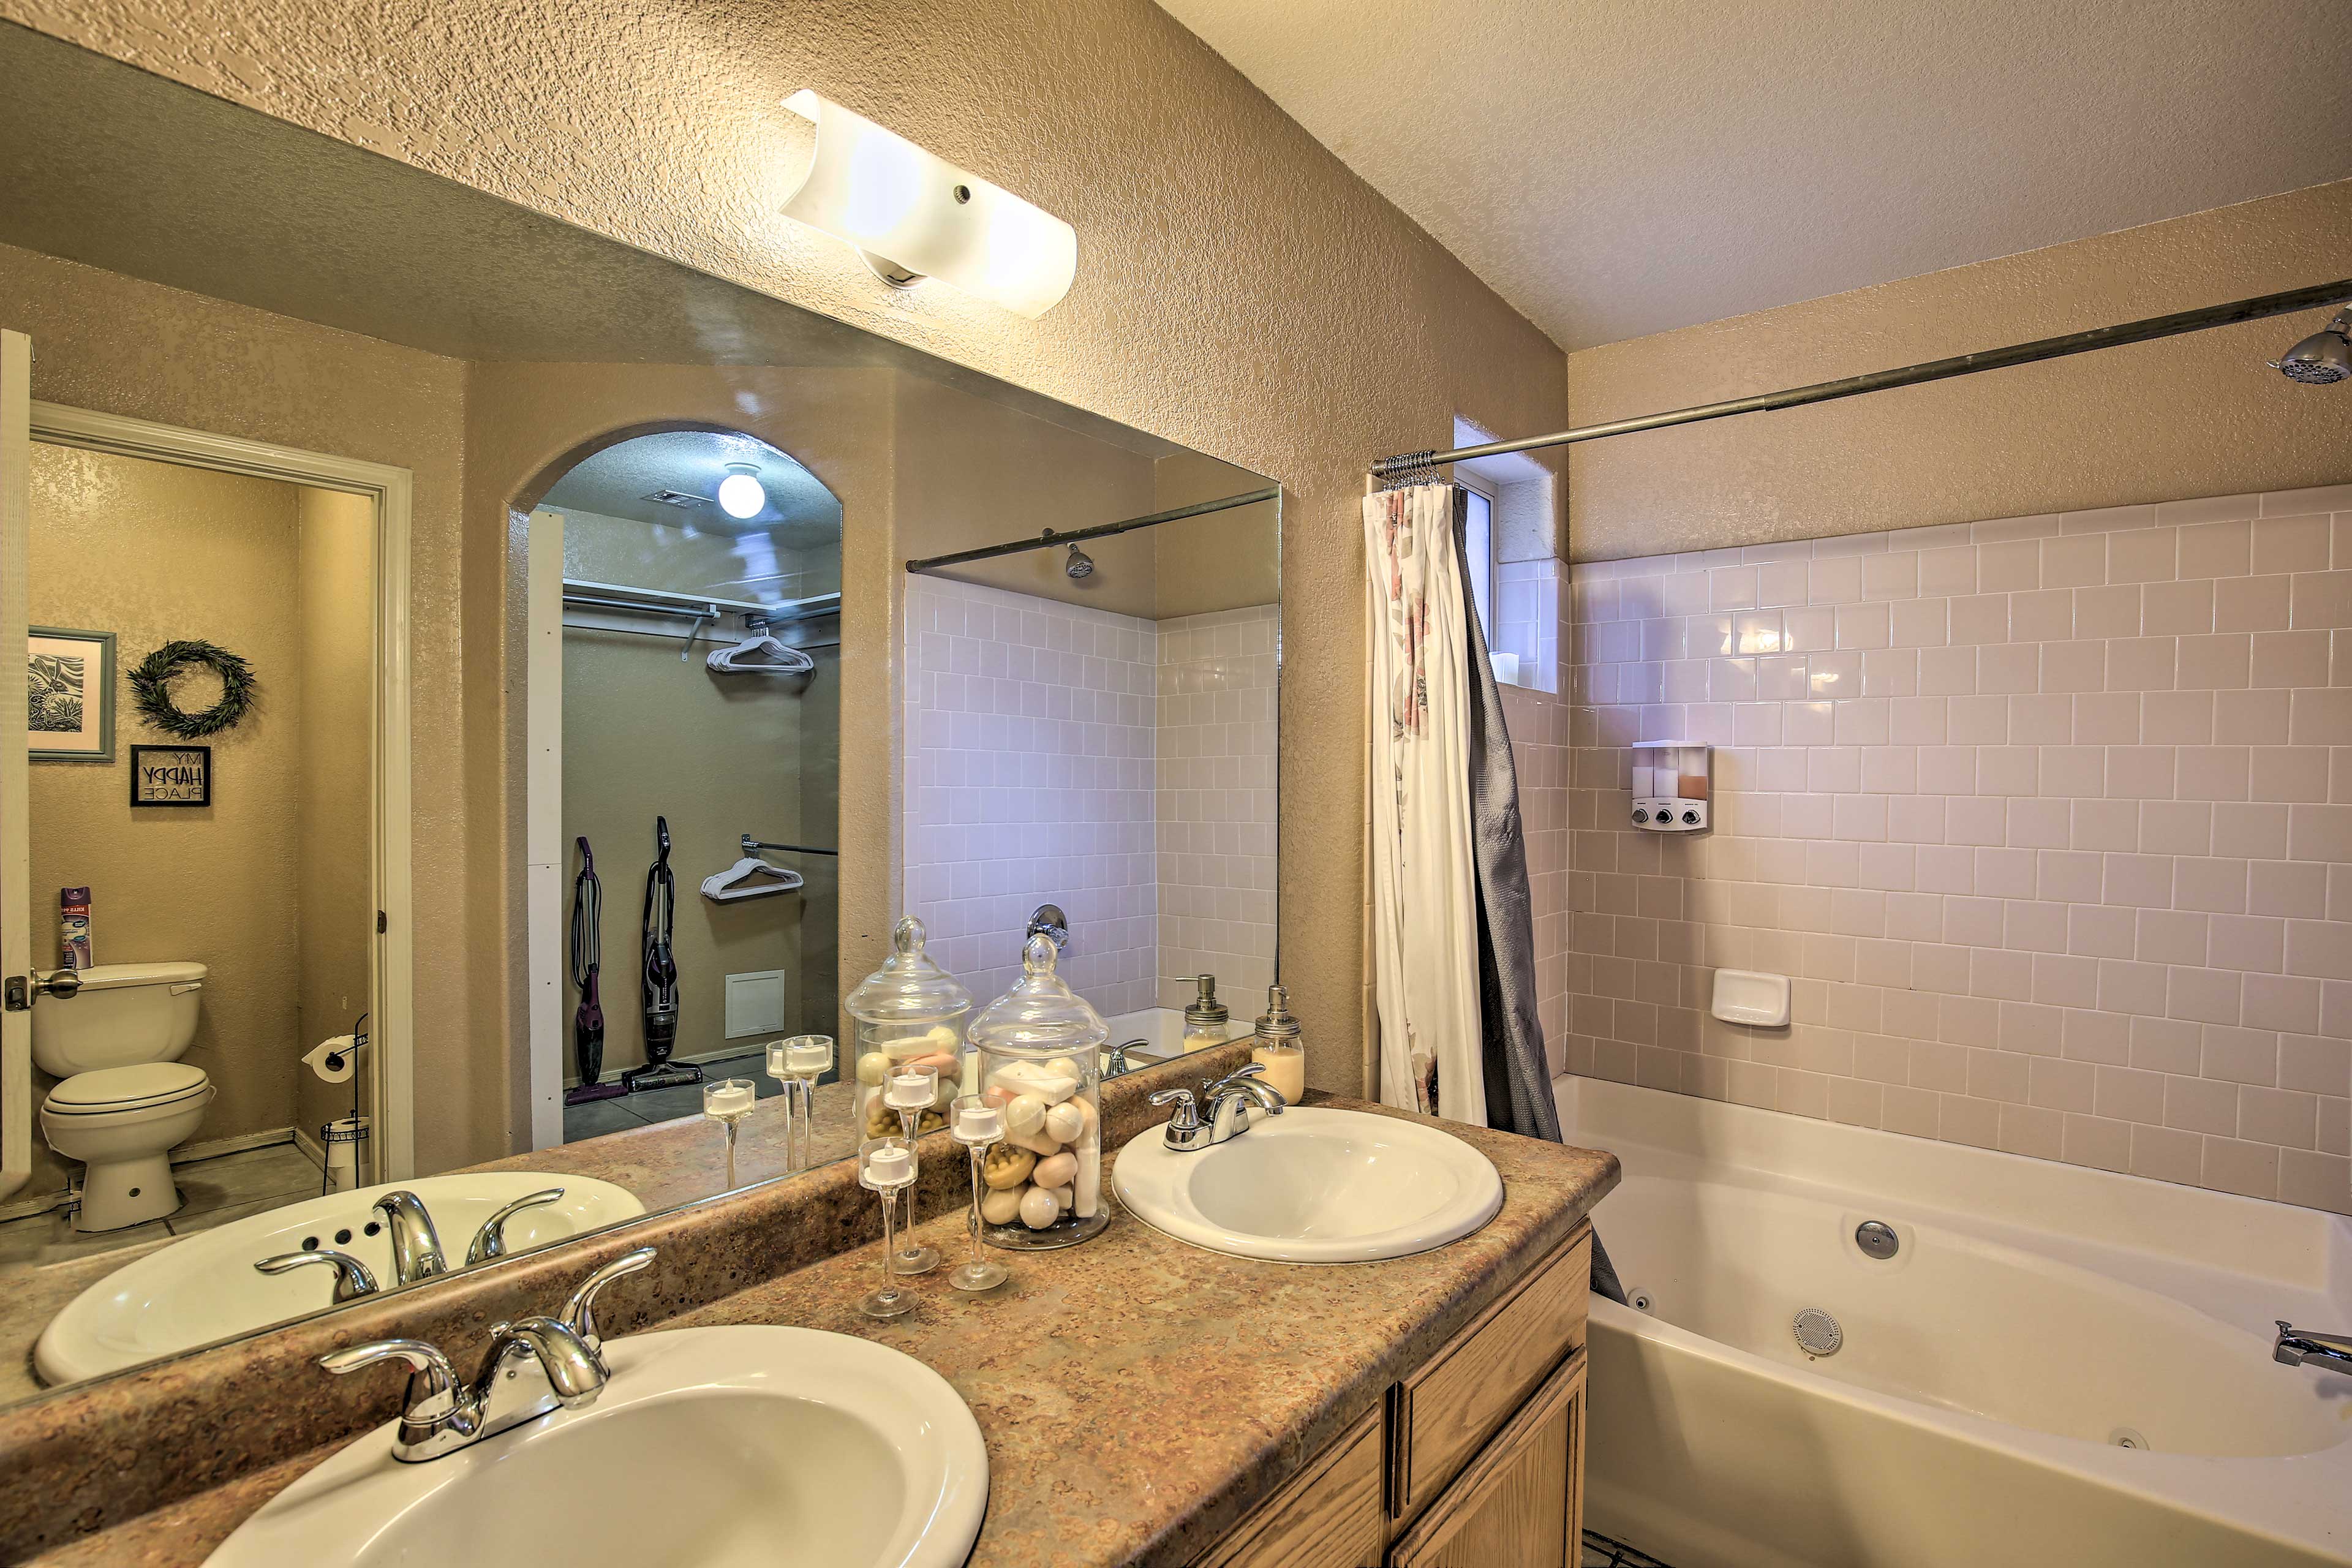 Double vanities will make it easy for multiple people to get ready.